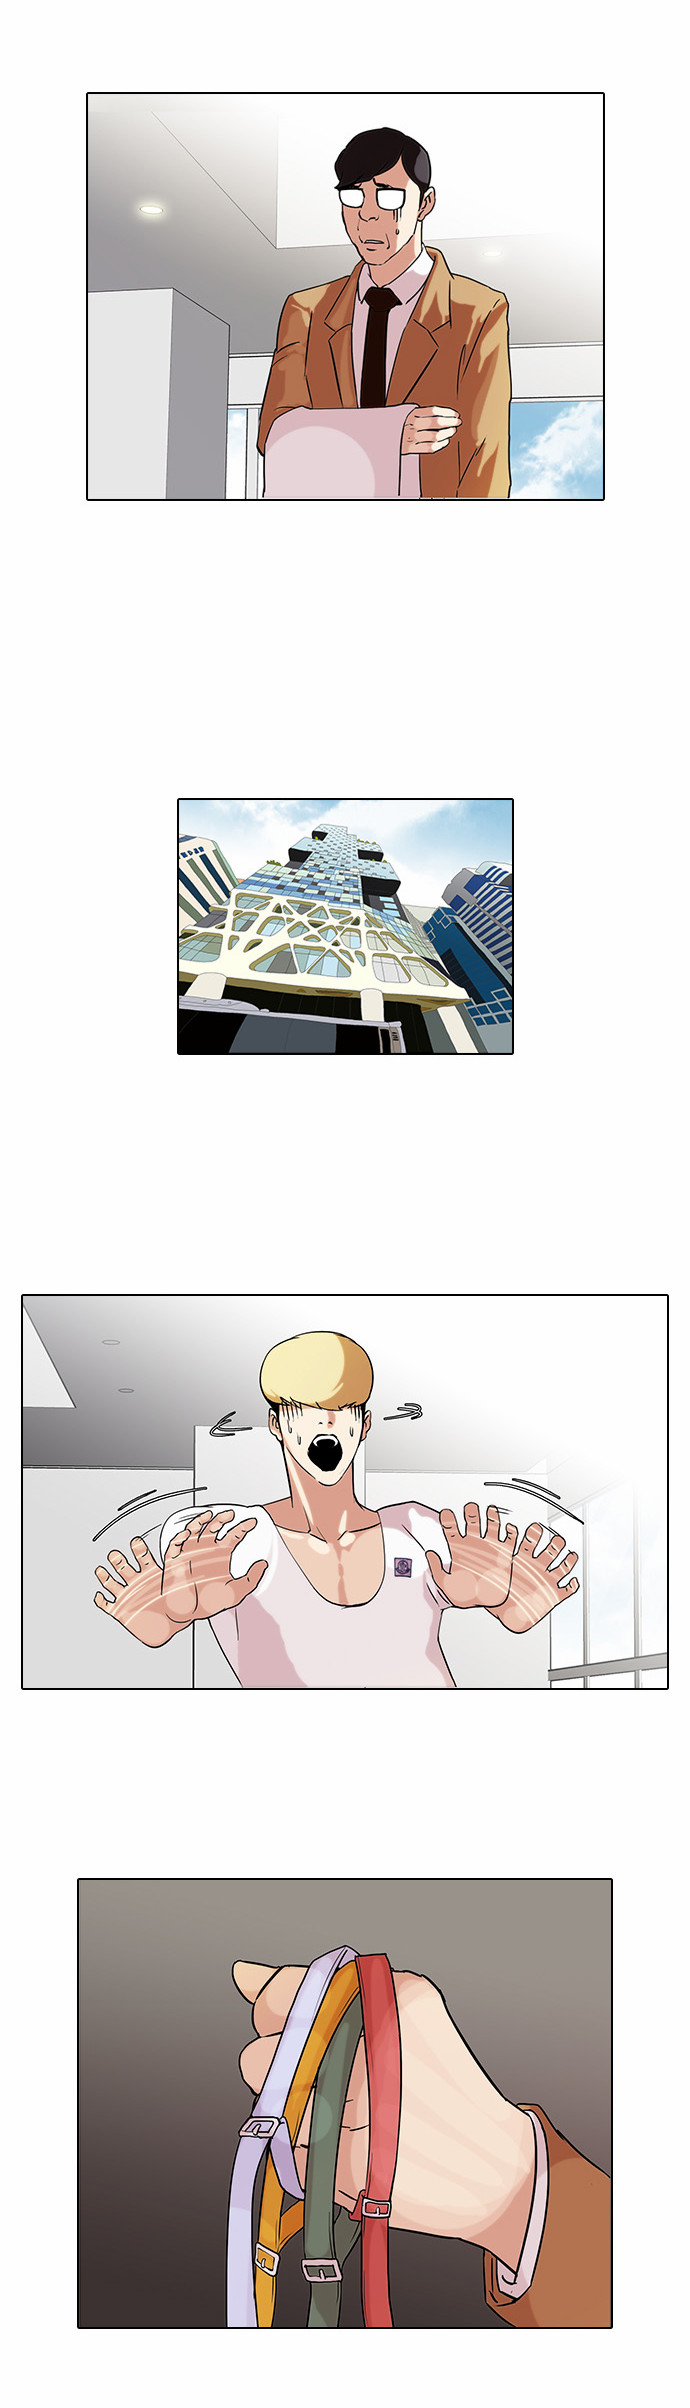 Lookism - Chapter 69 - Page 2